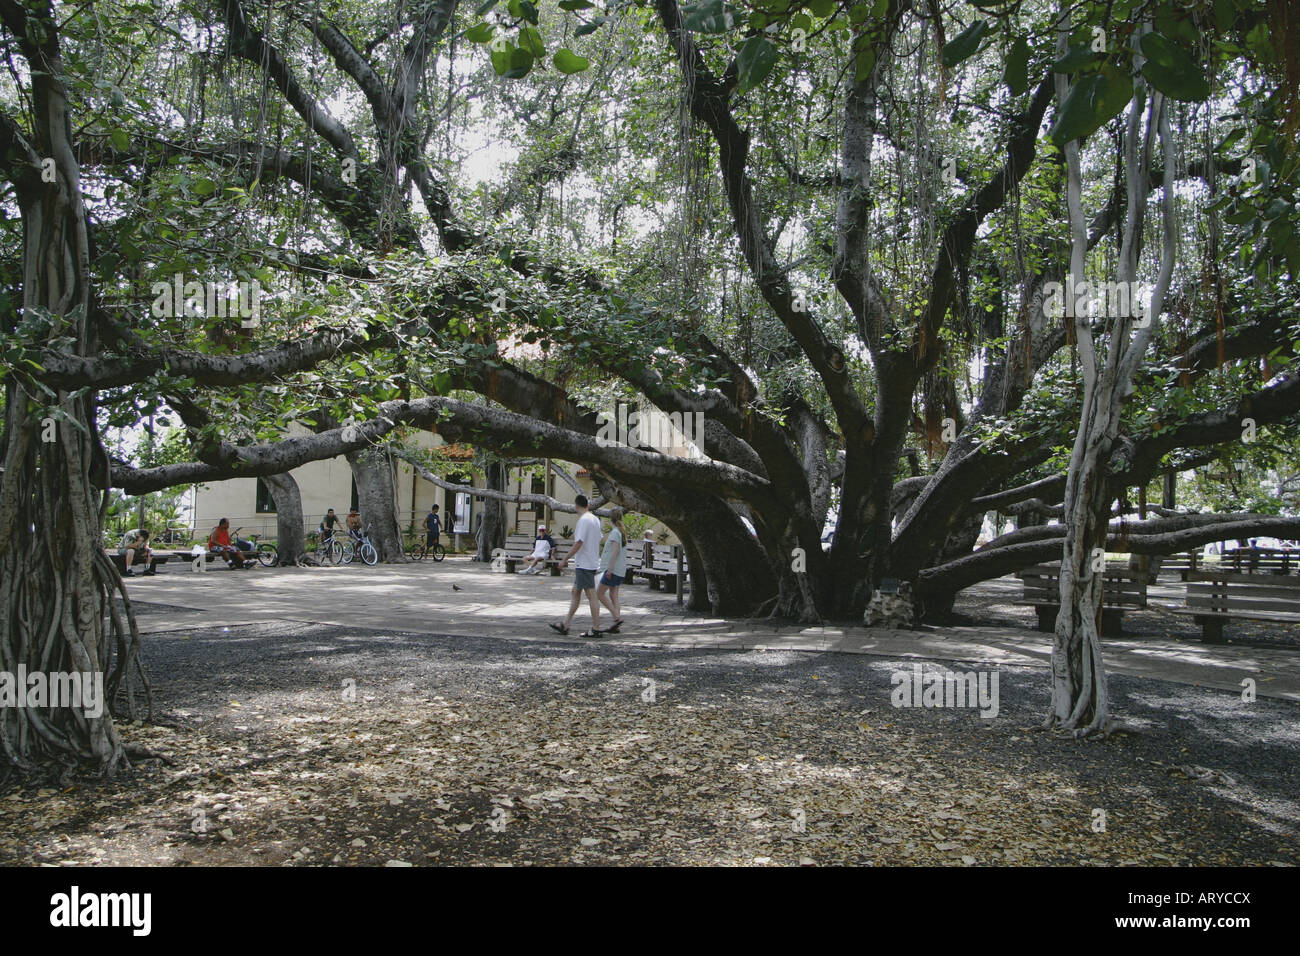 worlds largest Banyan tree,located in Banyan tree Park along Front street in historic Lahaina, is over fifty feet tall and Stock Photo